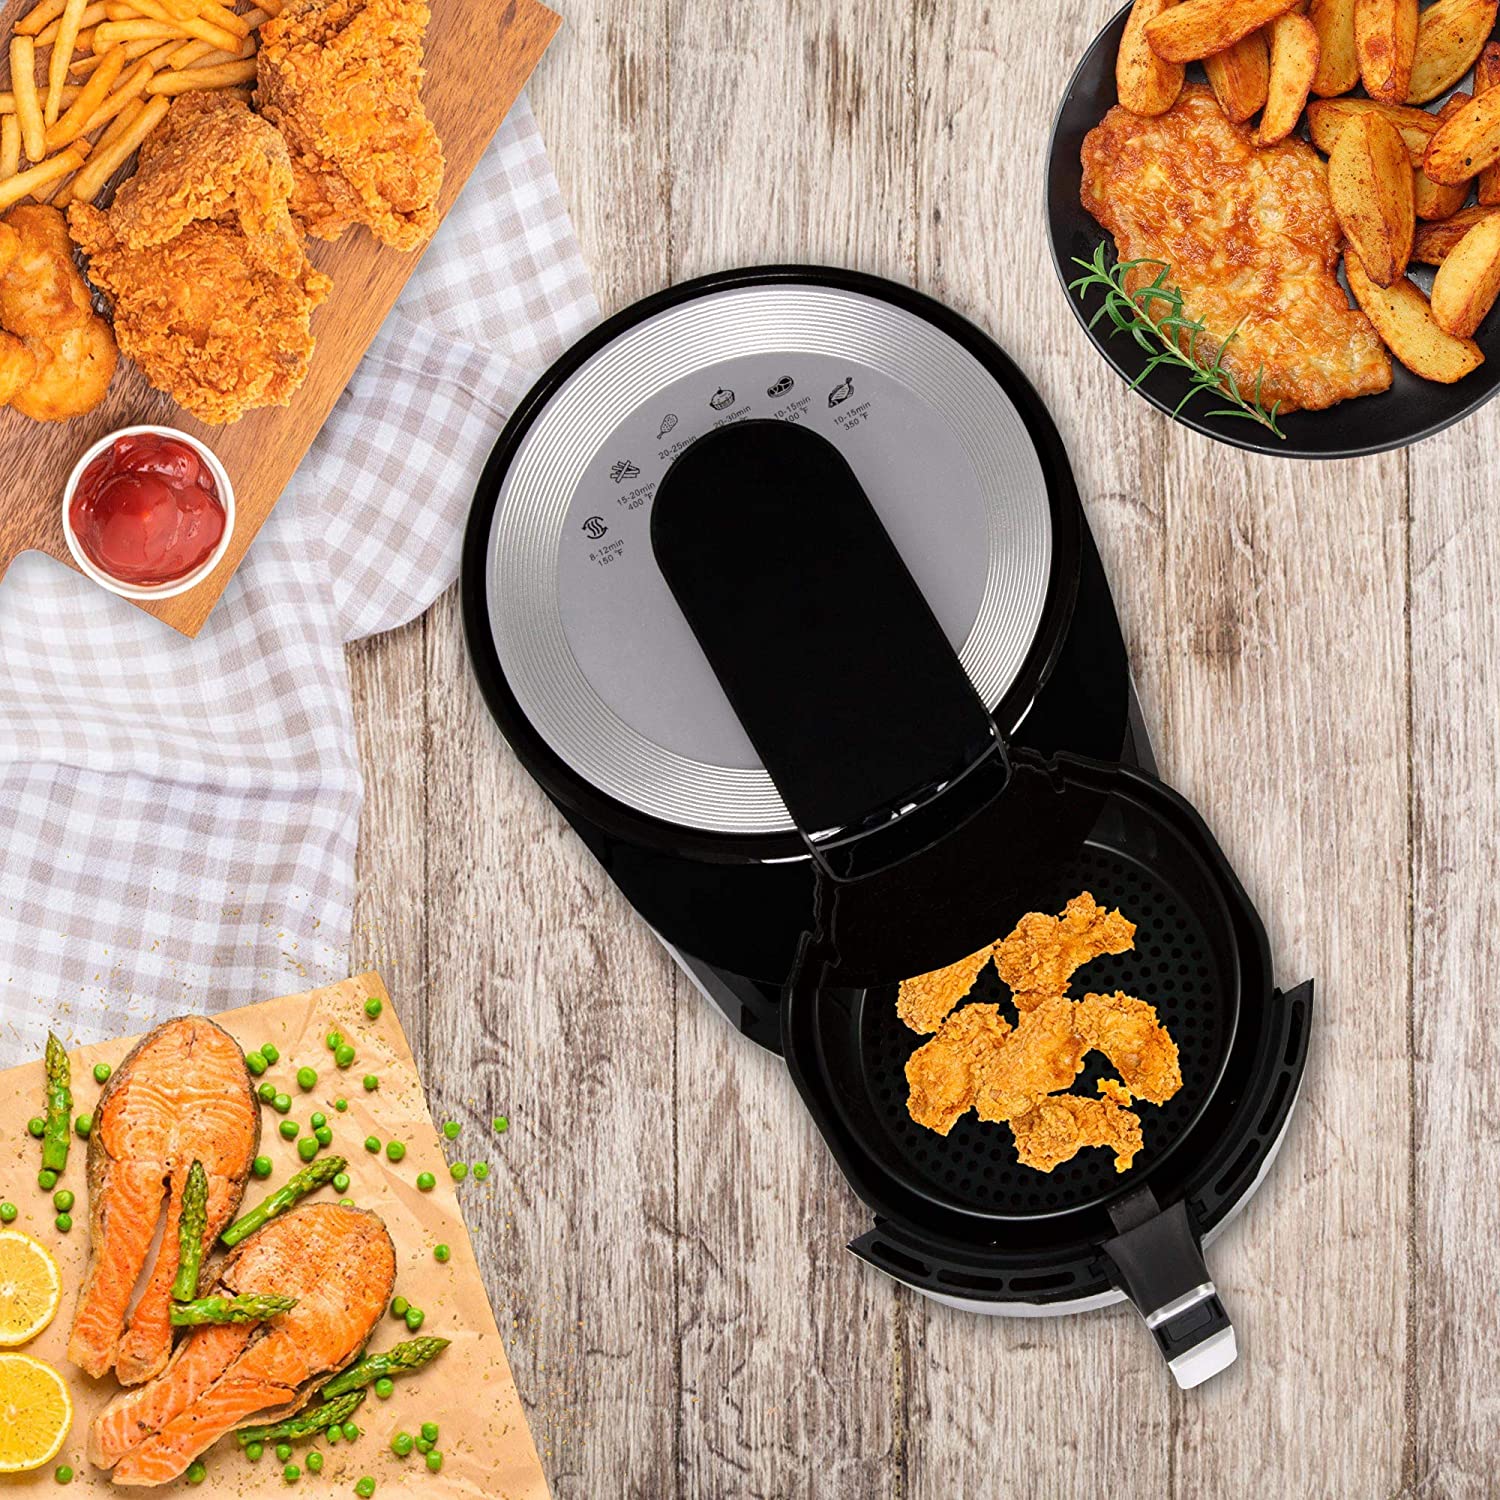 3.8 Quart Air Fryer, Electric Hot Oven Oilless Cooker with LCD Digital Screen | karmasfar.us